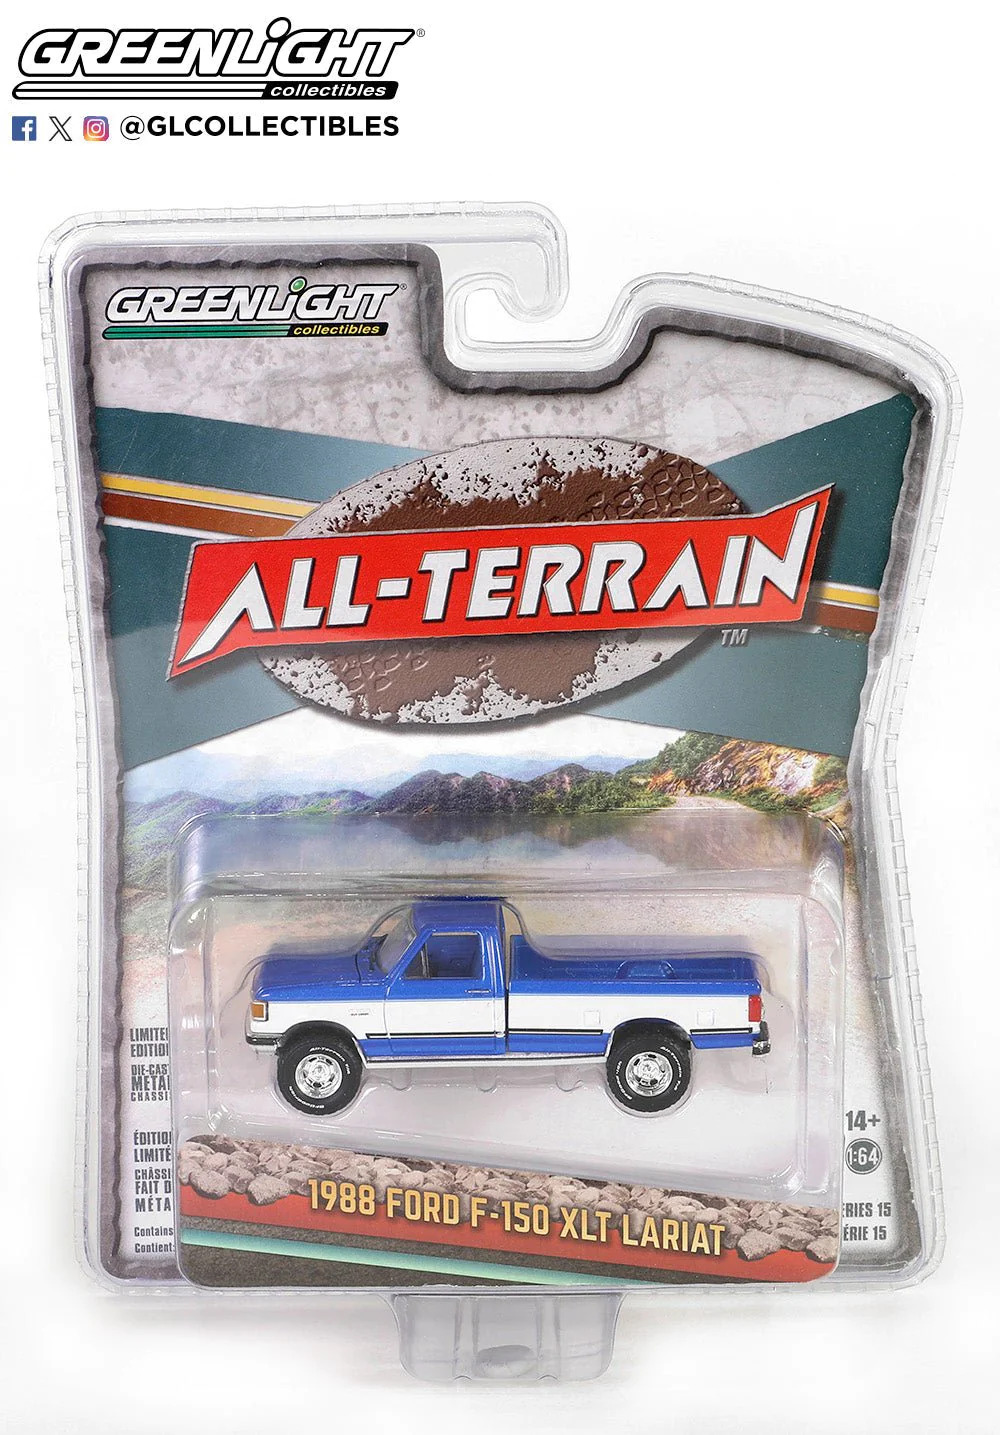 1988 Ford F-150 XLT Lariat Two-Tone Blue and White Greenlight Collectibles